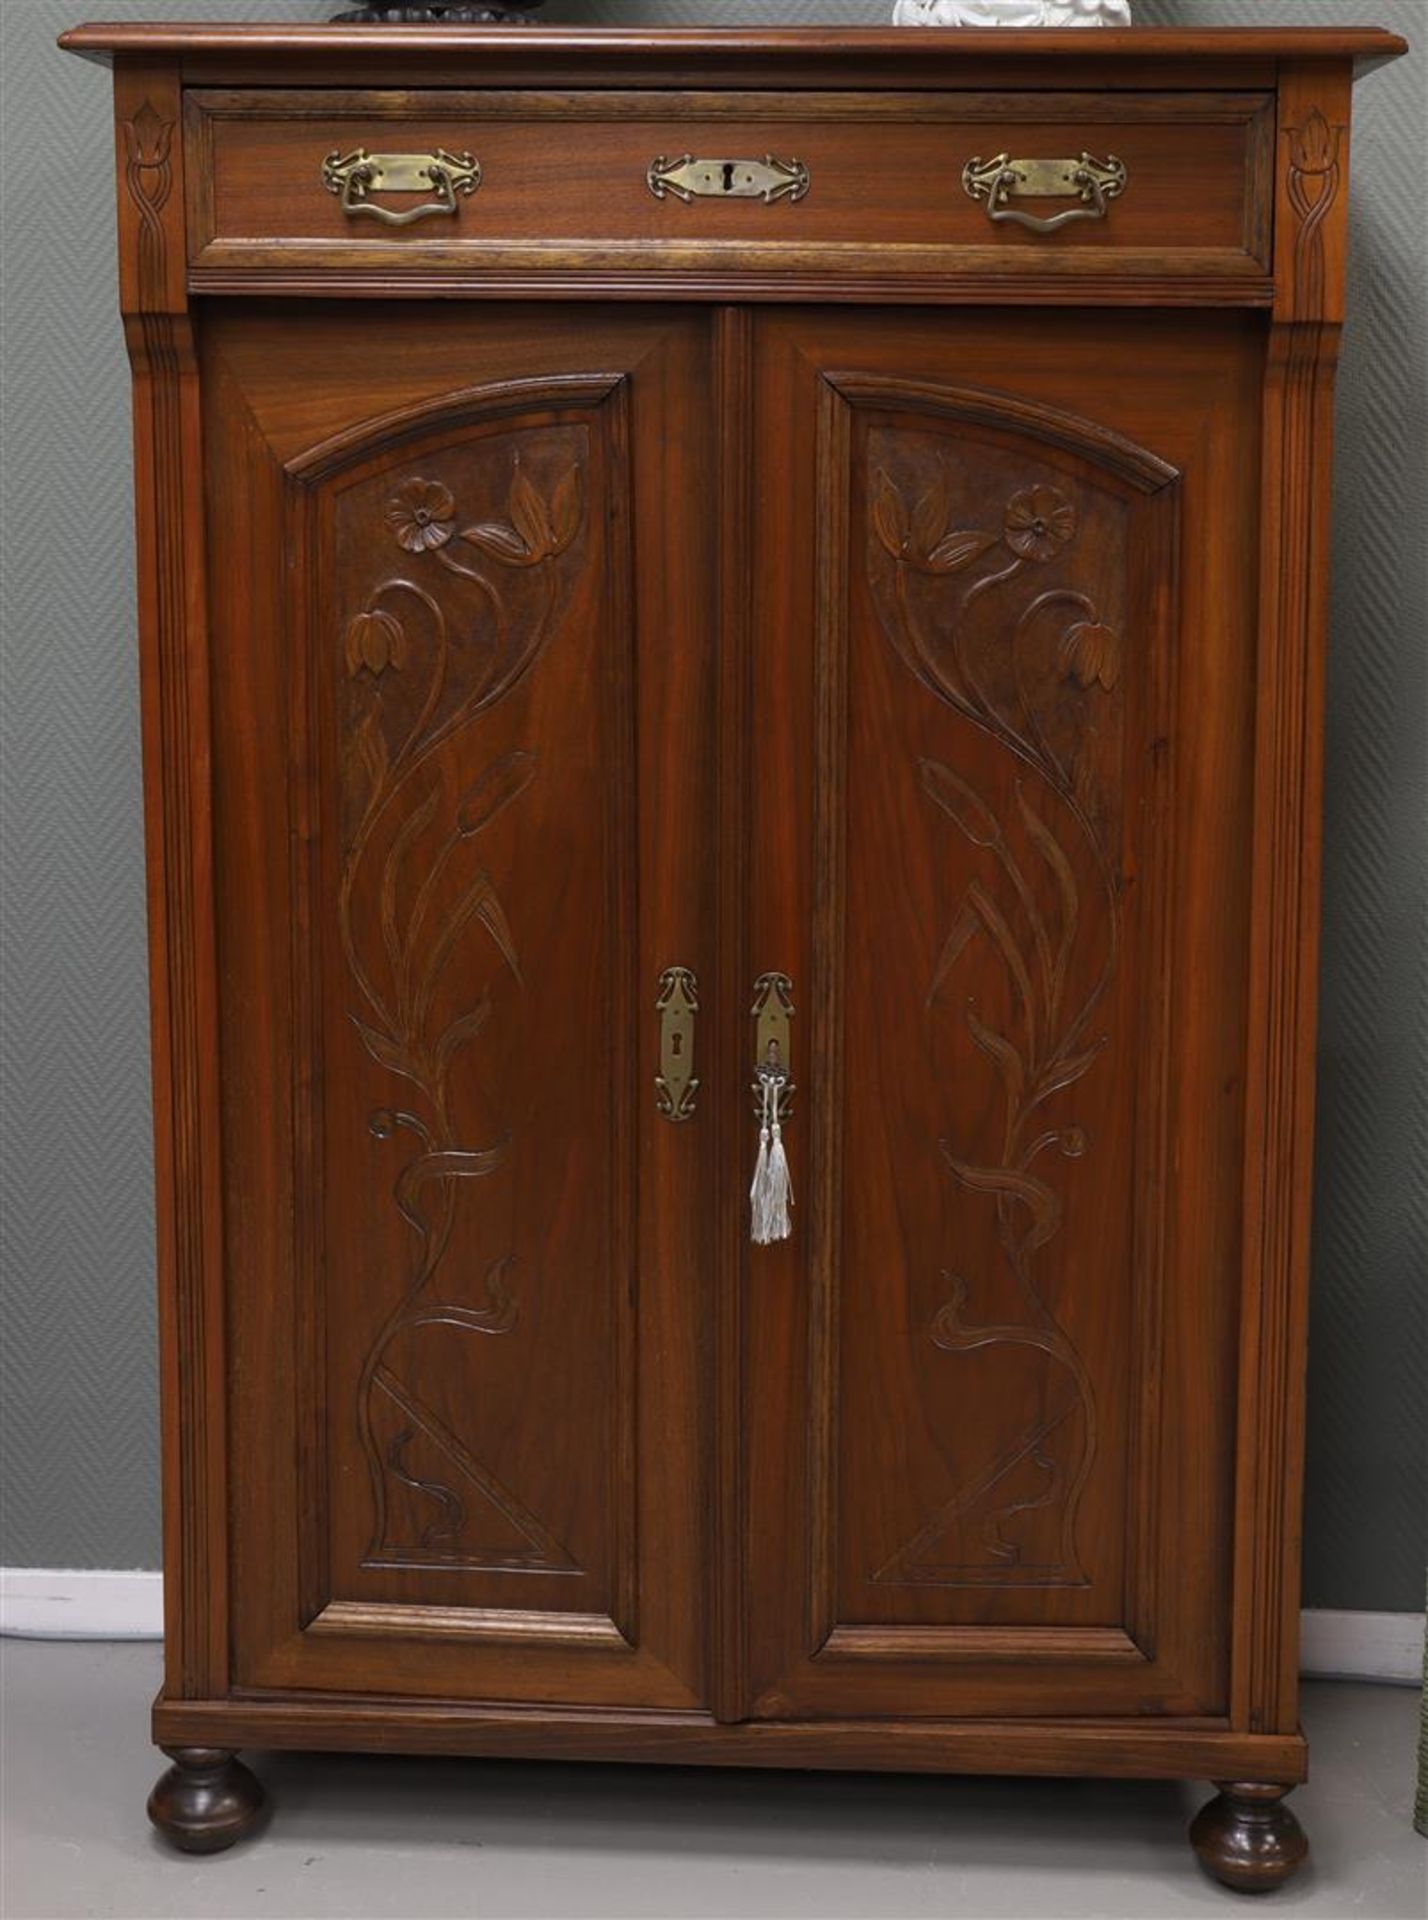 A two-door Art Nouveau vertico with a drawer above, Germany ca. 1900.